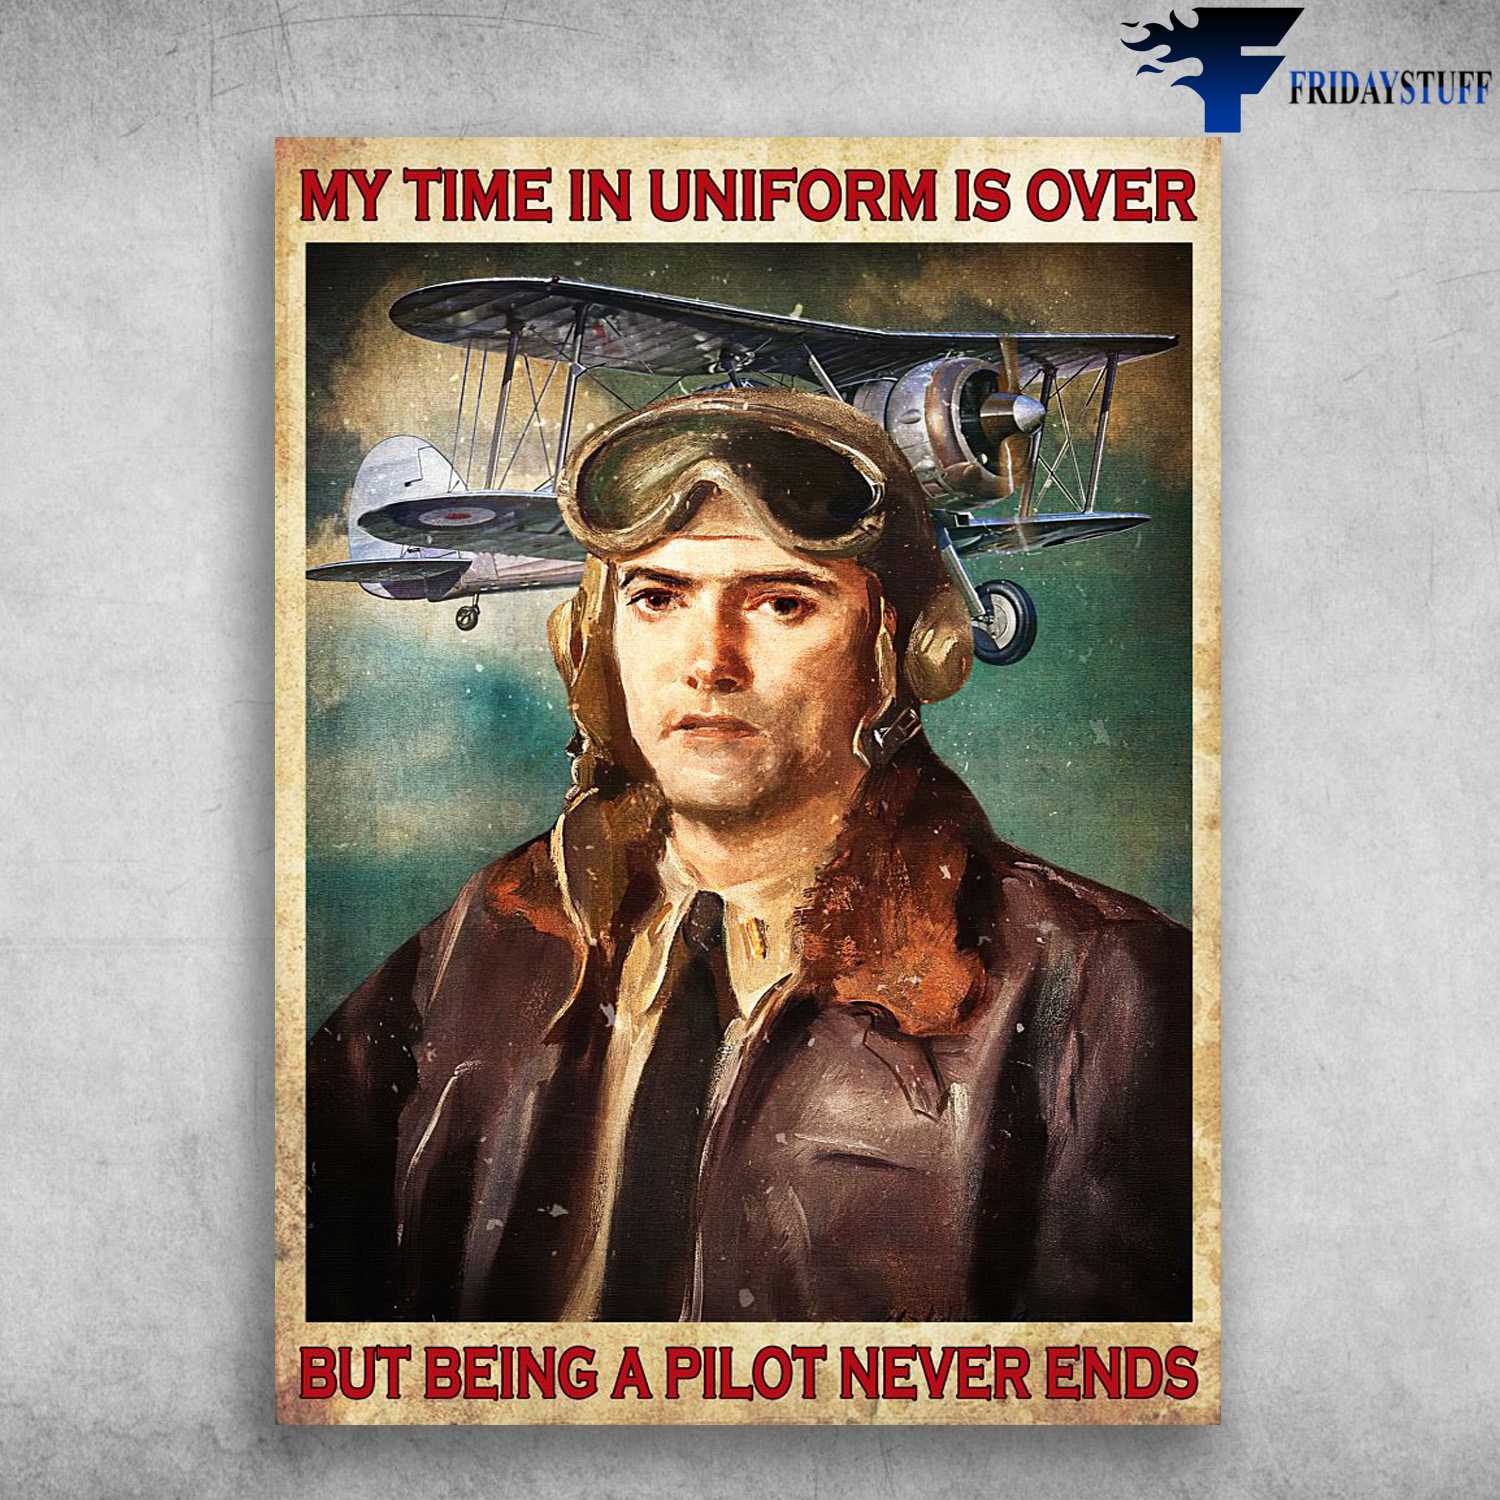 Pilot Aircraft - My Time In Uniform Is Over, But Being A Pilot Never Ends